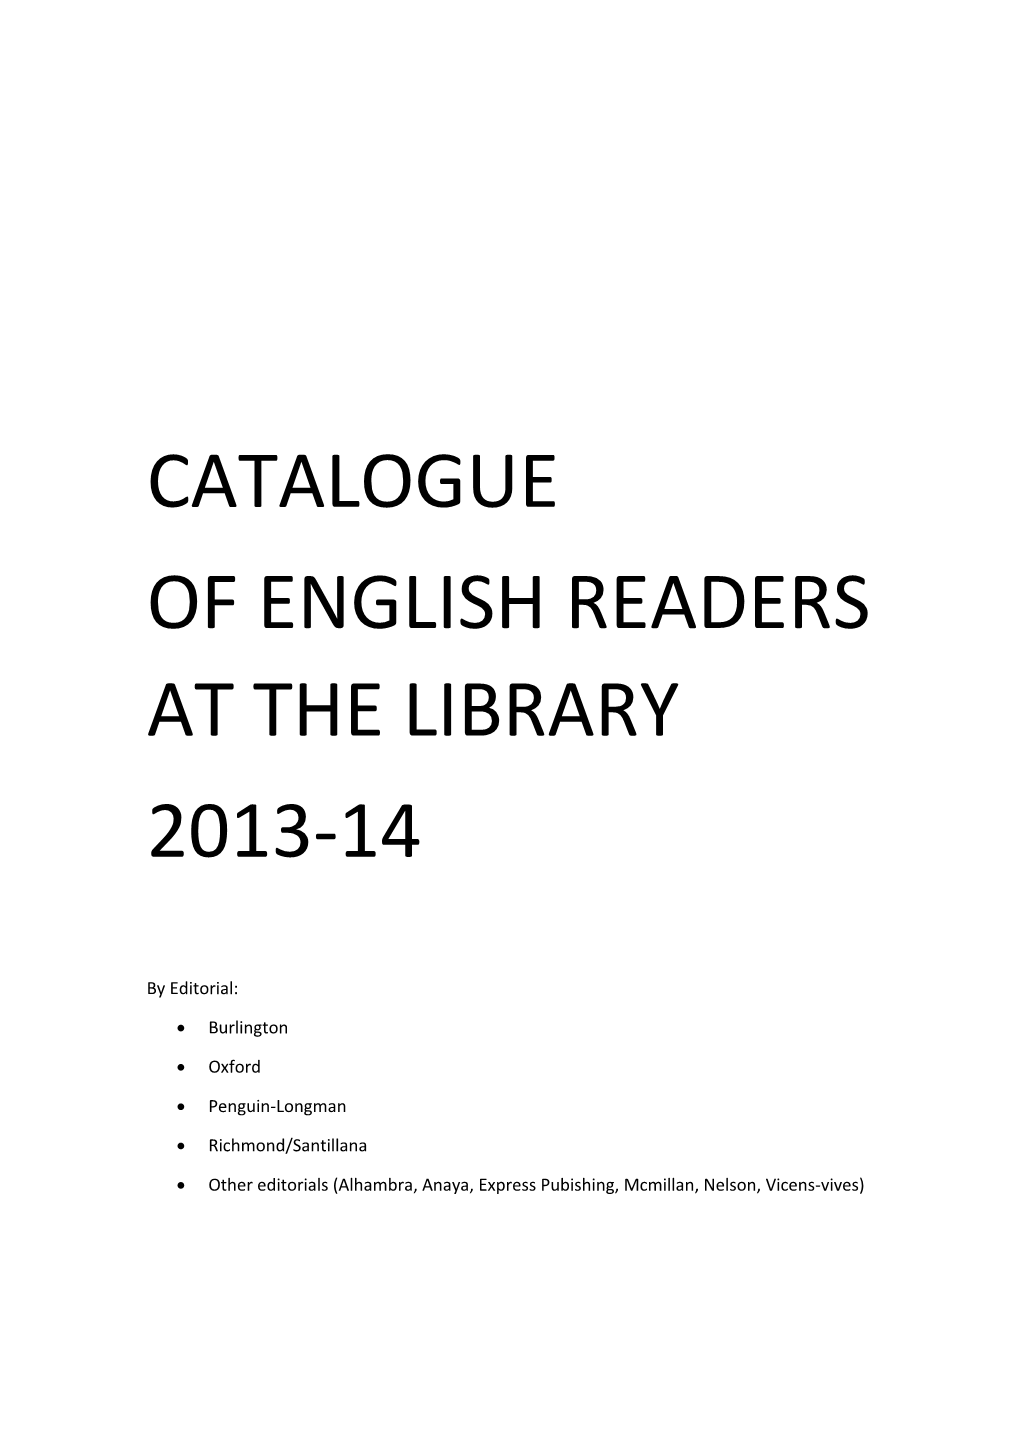 Of English Readers at the Library